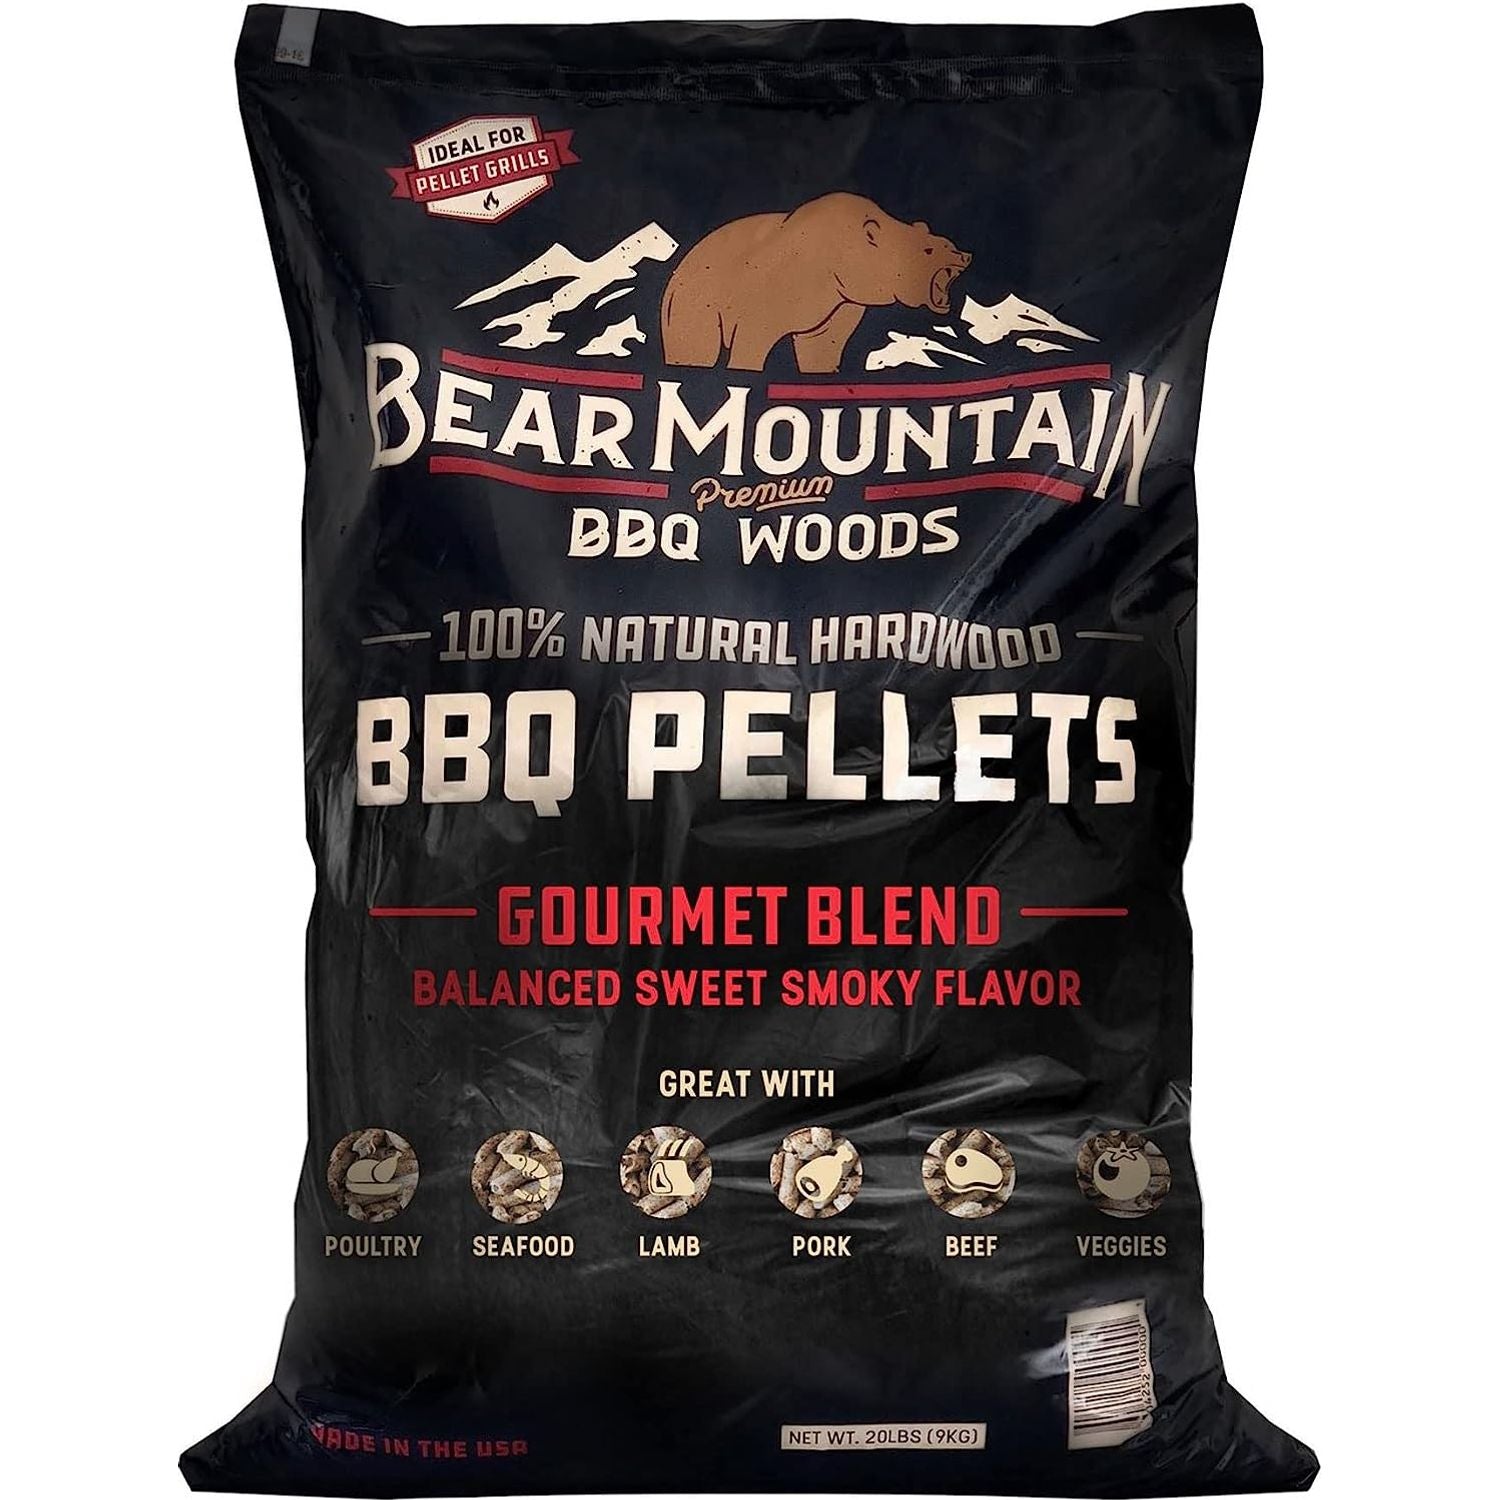 BEAR MOUNTAIN Premium BBQ WOODS 100% All-Natural Hardwood Pellets - Gourmet Blend Perfect for Pellet Smokers, or Any Outdoor Grill-Rich, Smoky Wood-Fired Flavor